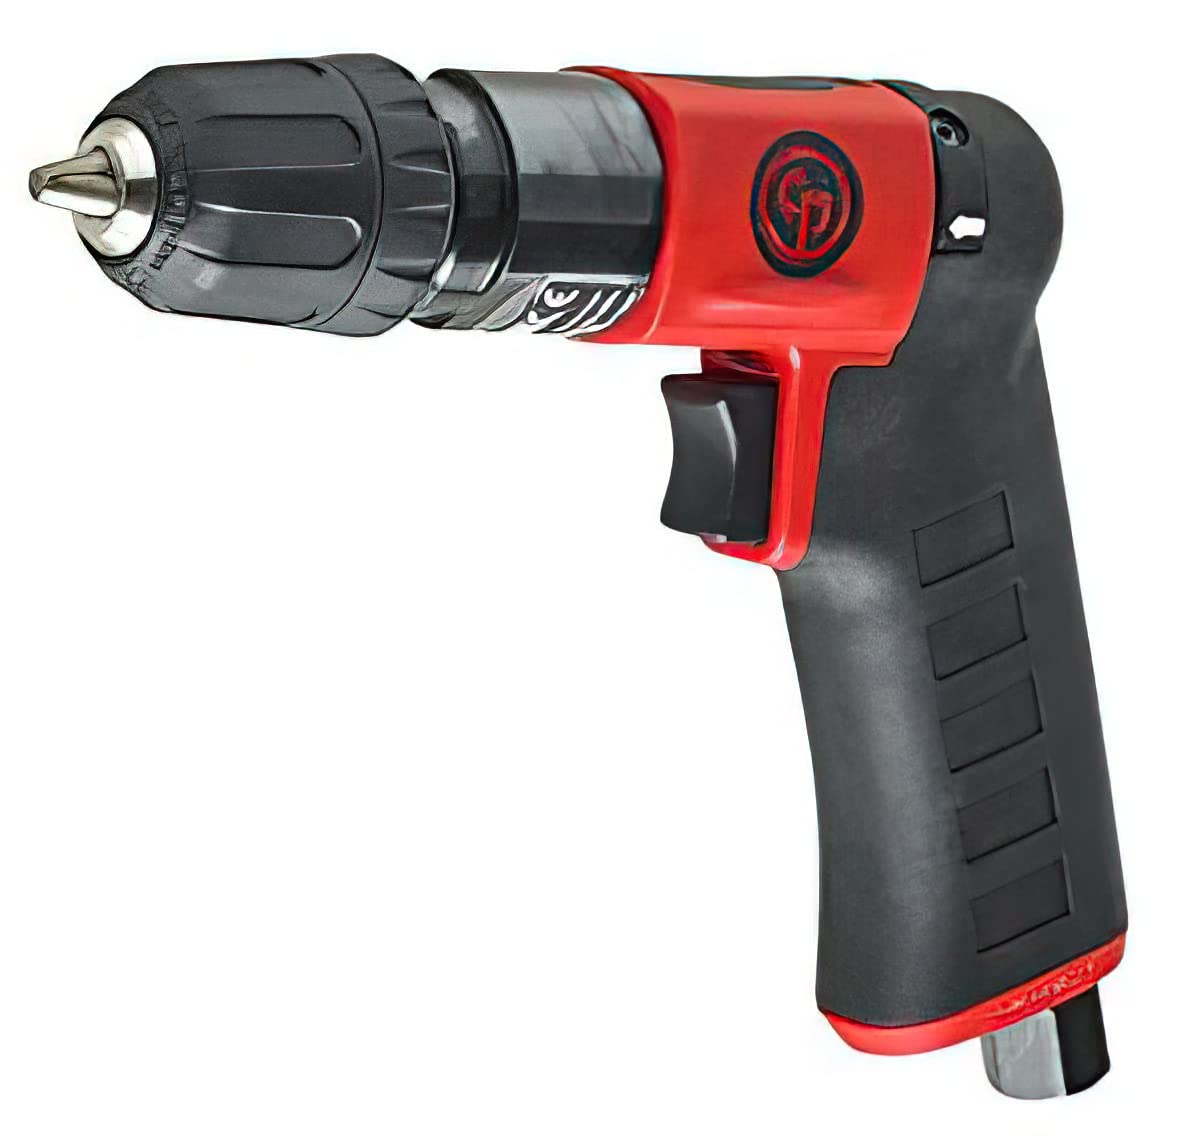 Chicago Pneumatic CP7300RQCC - Air Power Drill, Power Tools, Reversible, 1/4 Inch (6.5 mm), Reversible, Keyless Chuck, Pistol Handle, 0.31 HP/230 W, Stall Torque 1.9 ft. lbf/2.6 NM - 2800 RPM